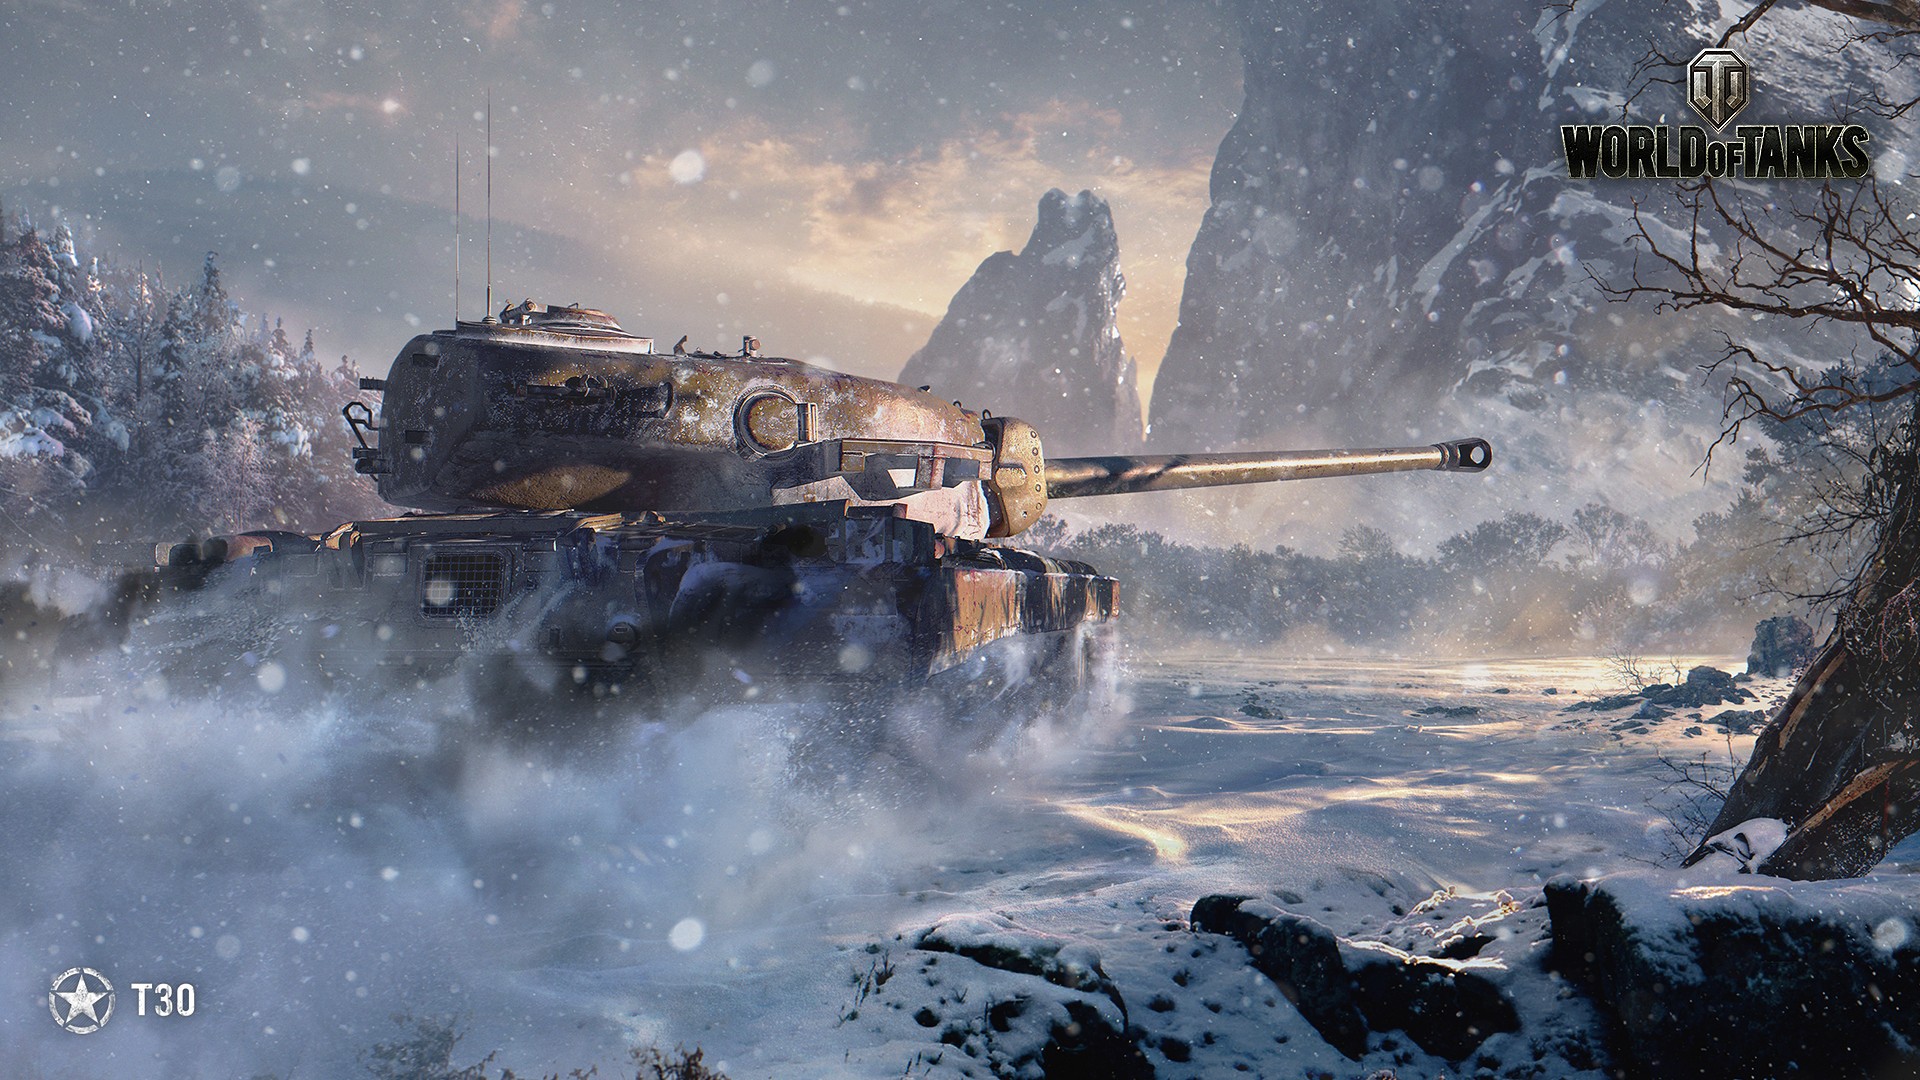 General 1920x1080 World of Tanks military snow mountains forest military vehicle vehicle video games PC gaming digital art logo